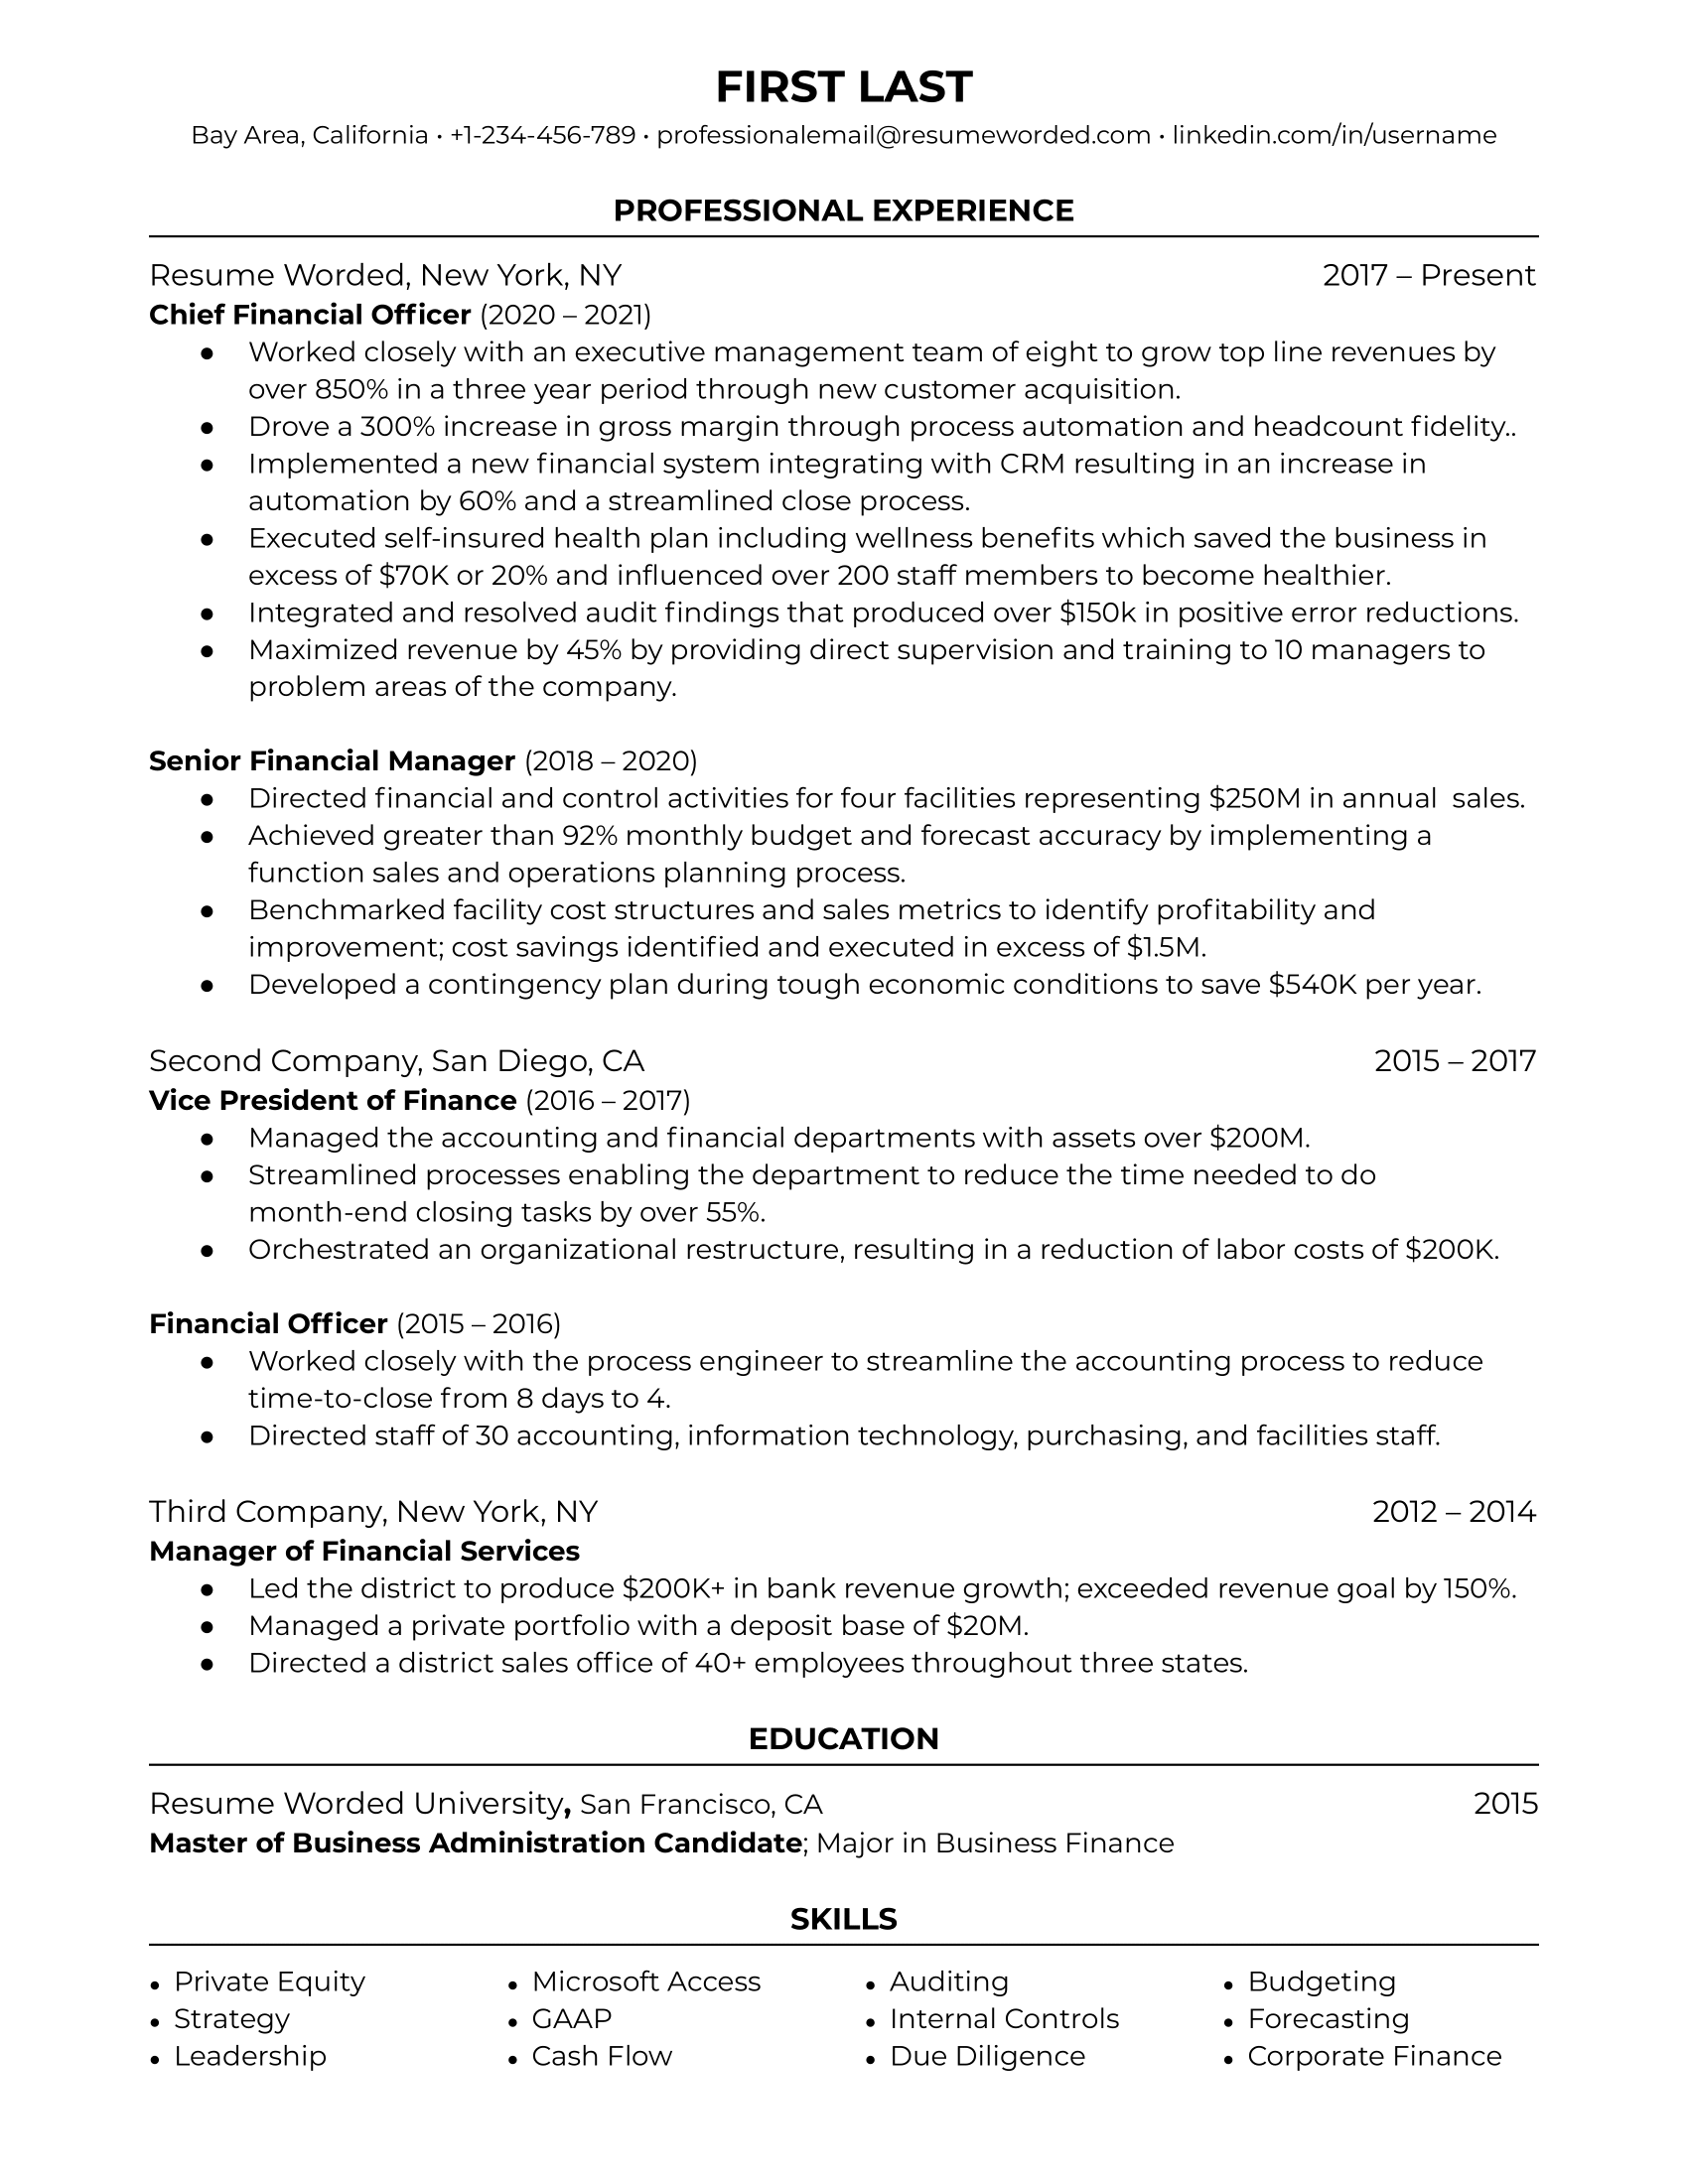 CFO resume with emphasis on financial skills and technology expertise